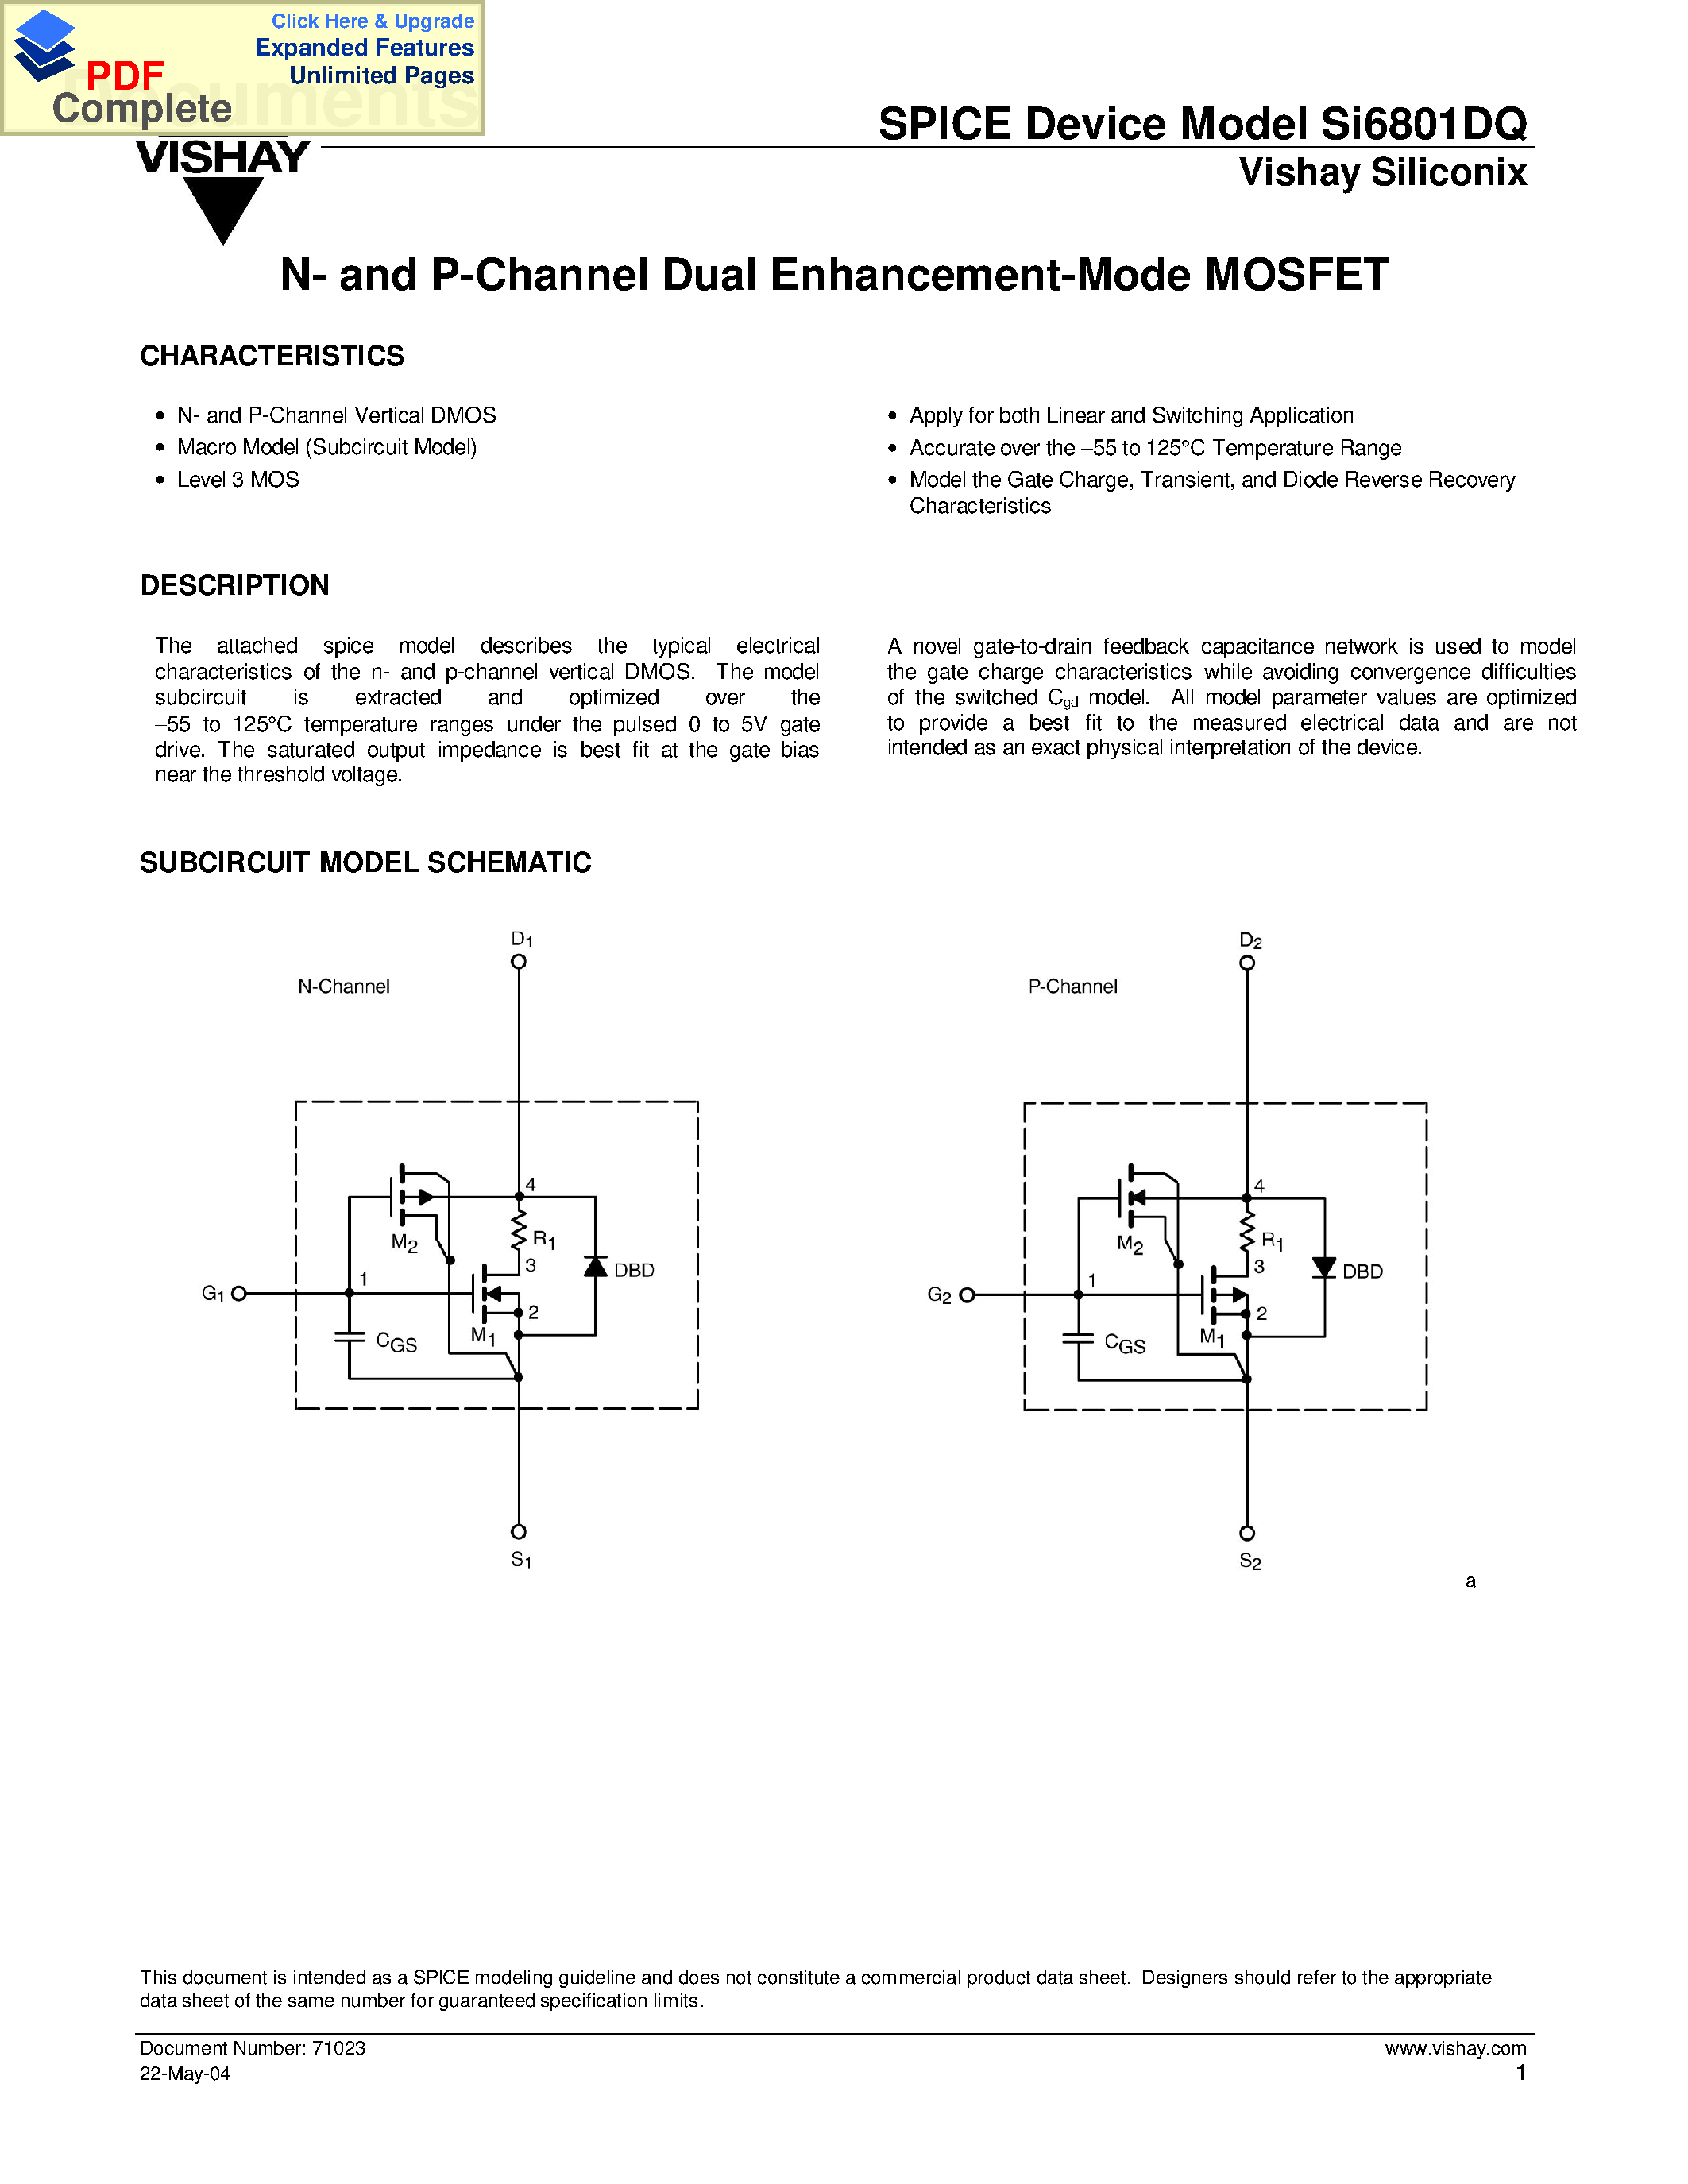 Datasheet SI6801DQ - SPICE Device Model Si6801DQ page 1